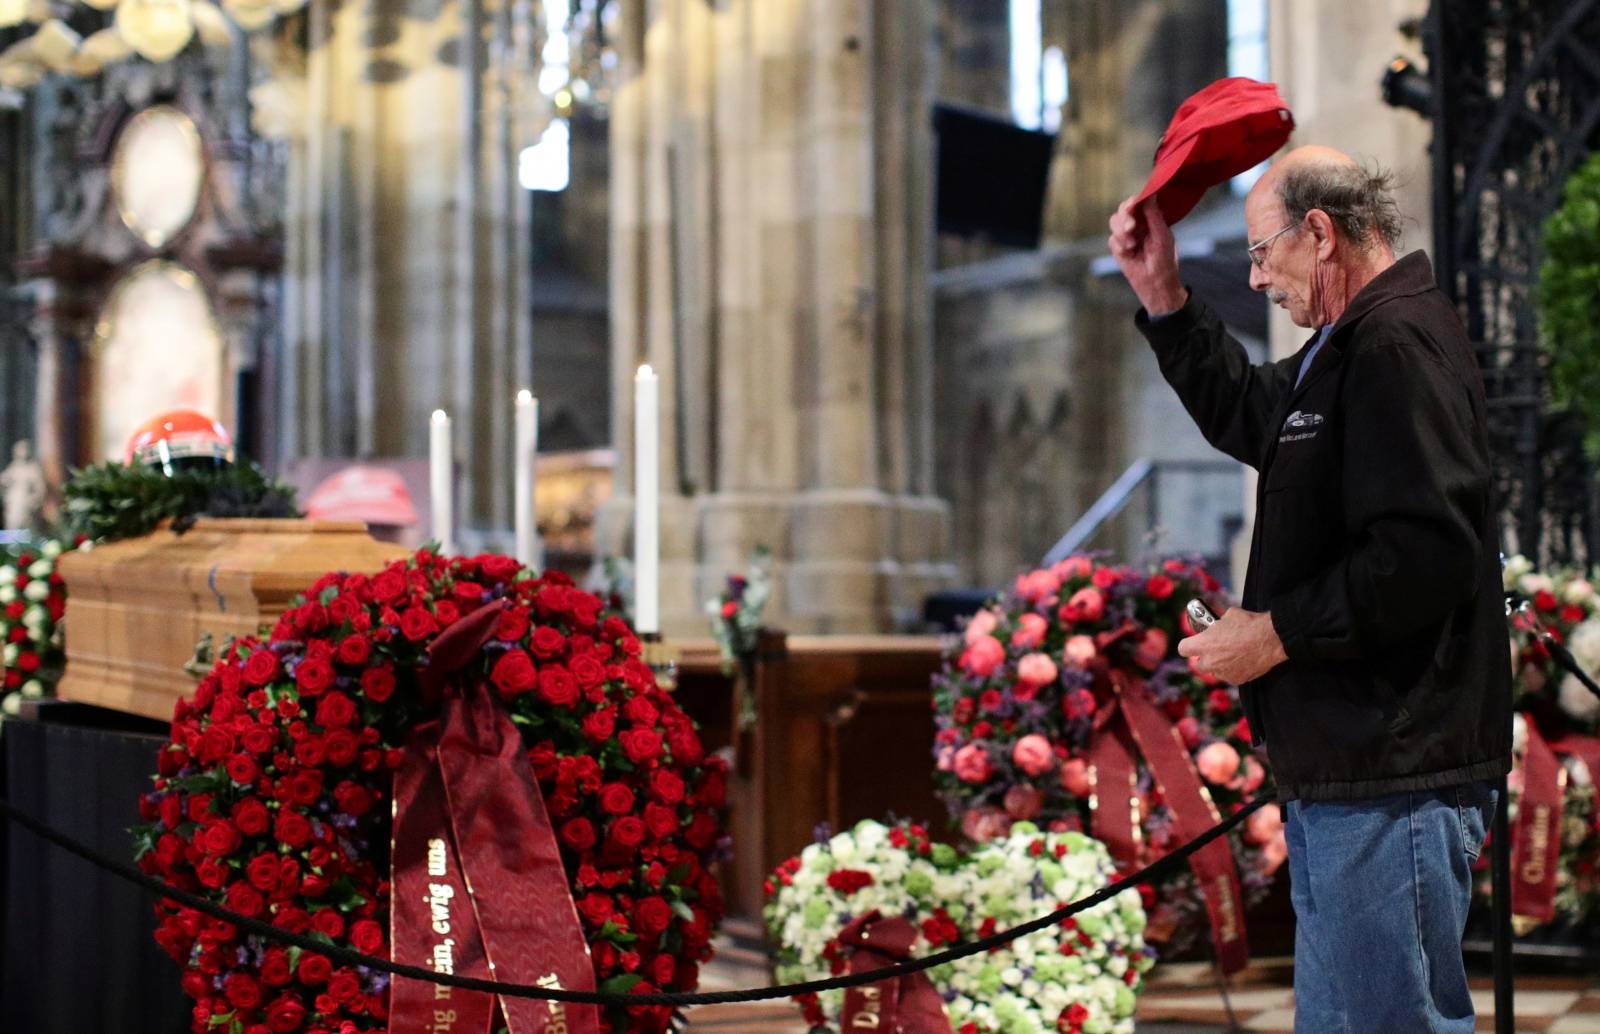 Funeral service for Austrian motor racing greatÂ Niki Lauda at St Stephen's cathedral in Vienna